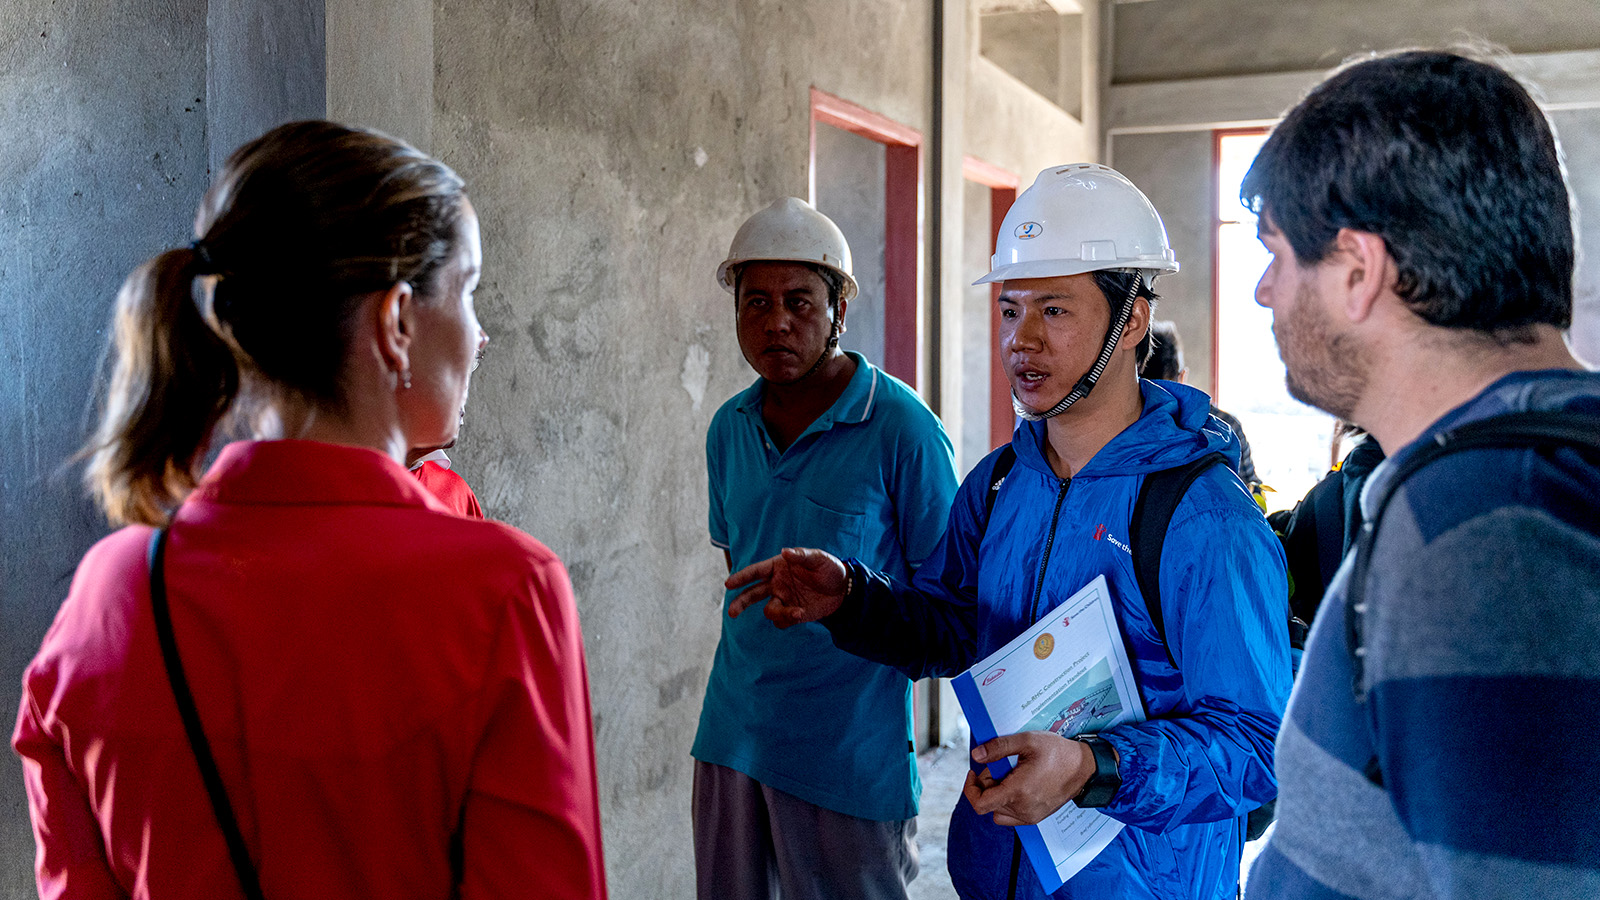 five people having a discussion in a construction building